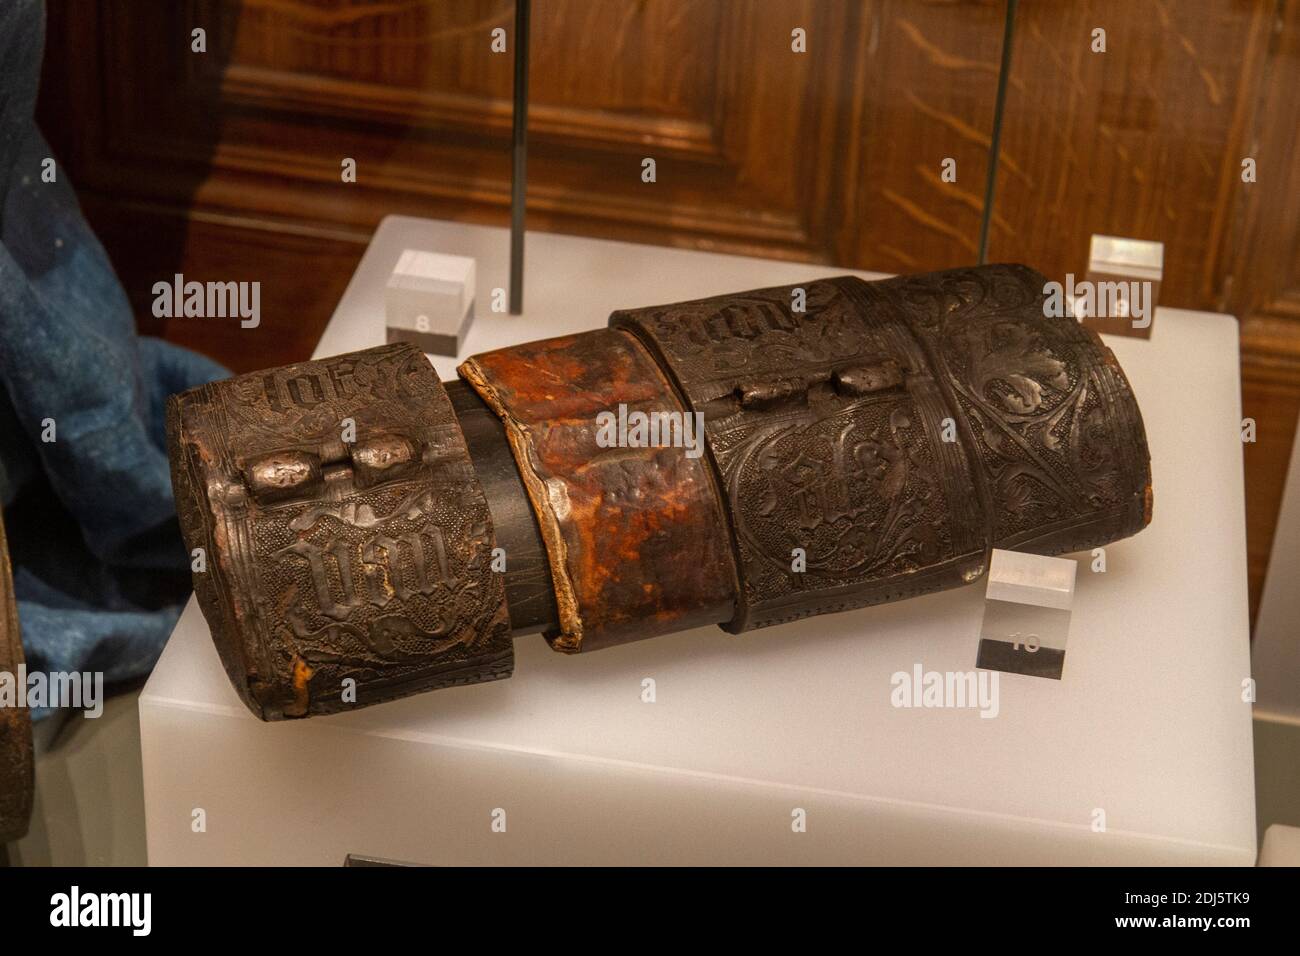 A 15th century Touchstone in a leather sheath, National Civil War Centre, Newark Museum, Newark-on-Trent, Notts, UK. Stock Photo